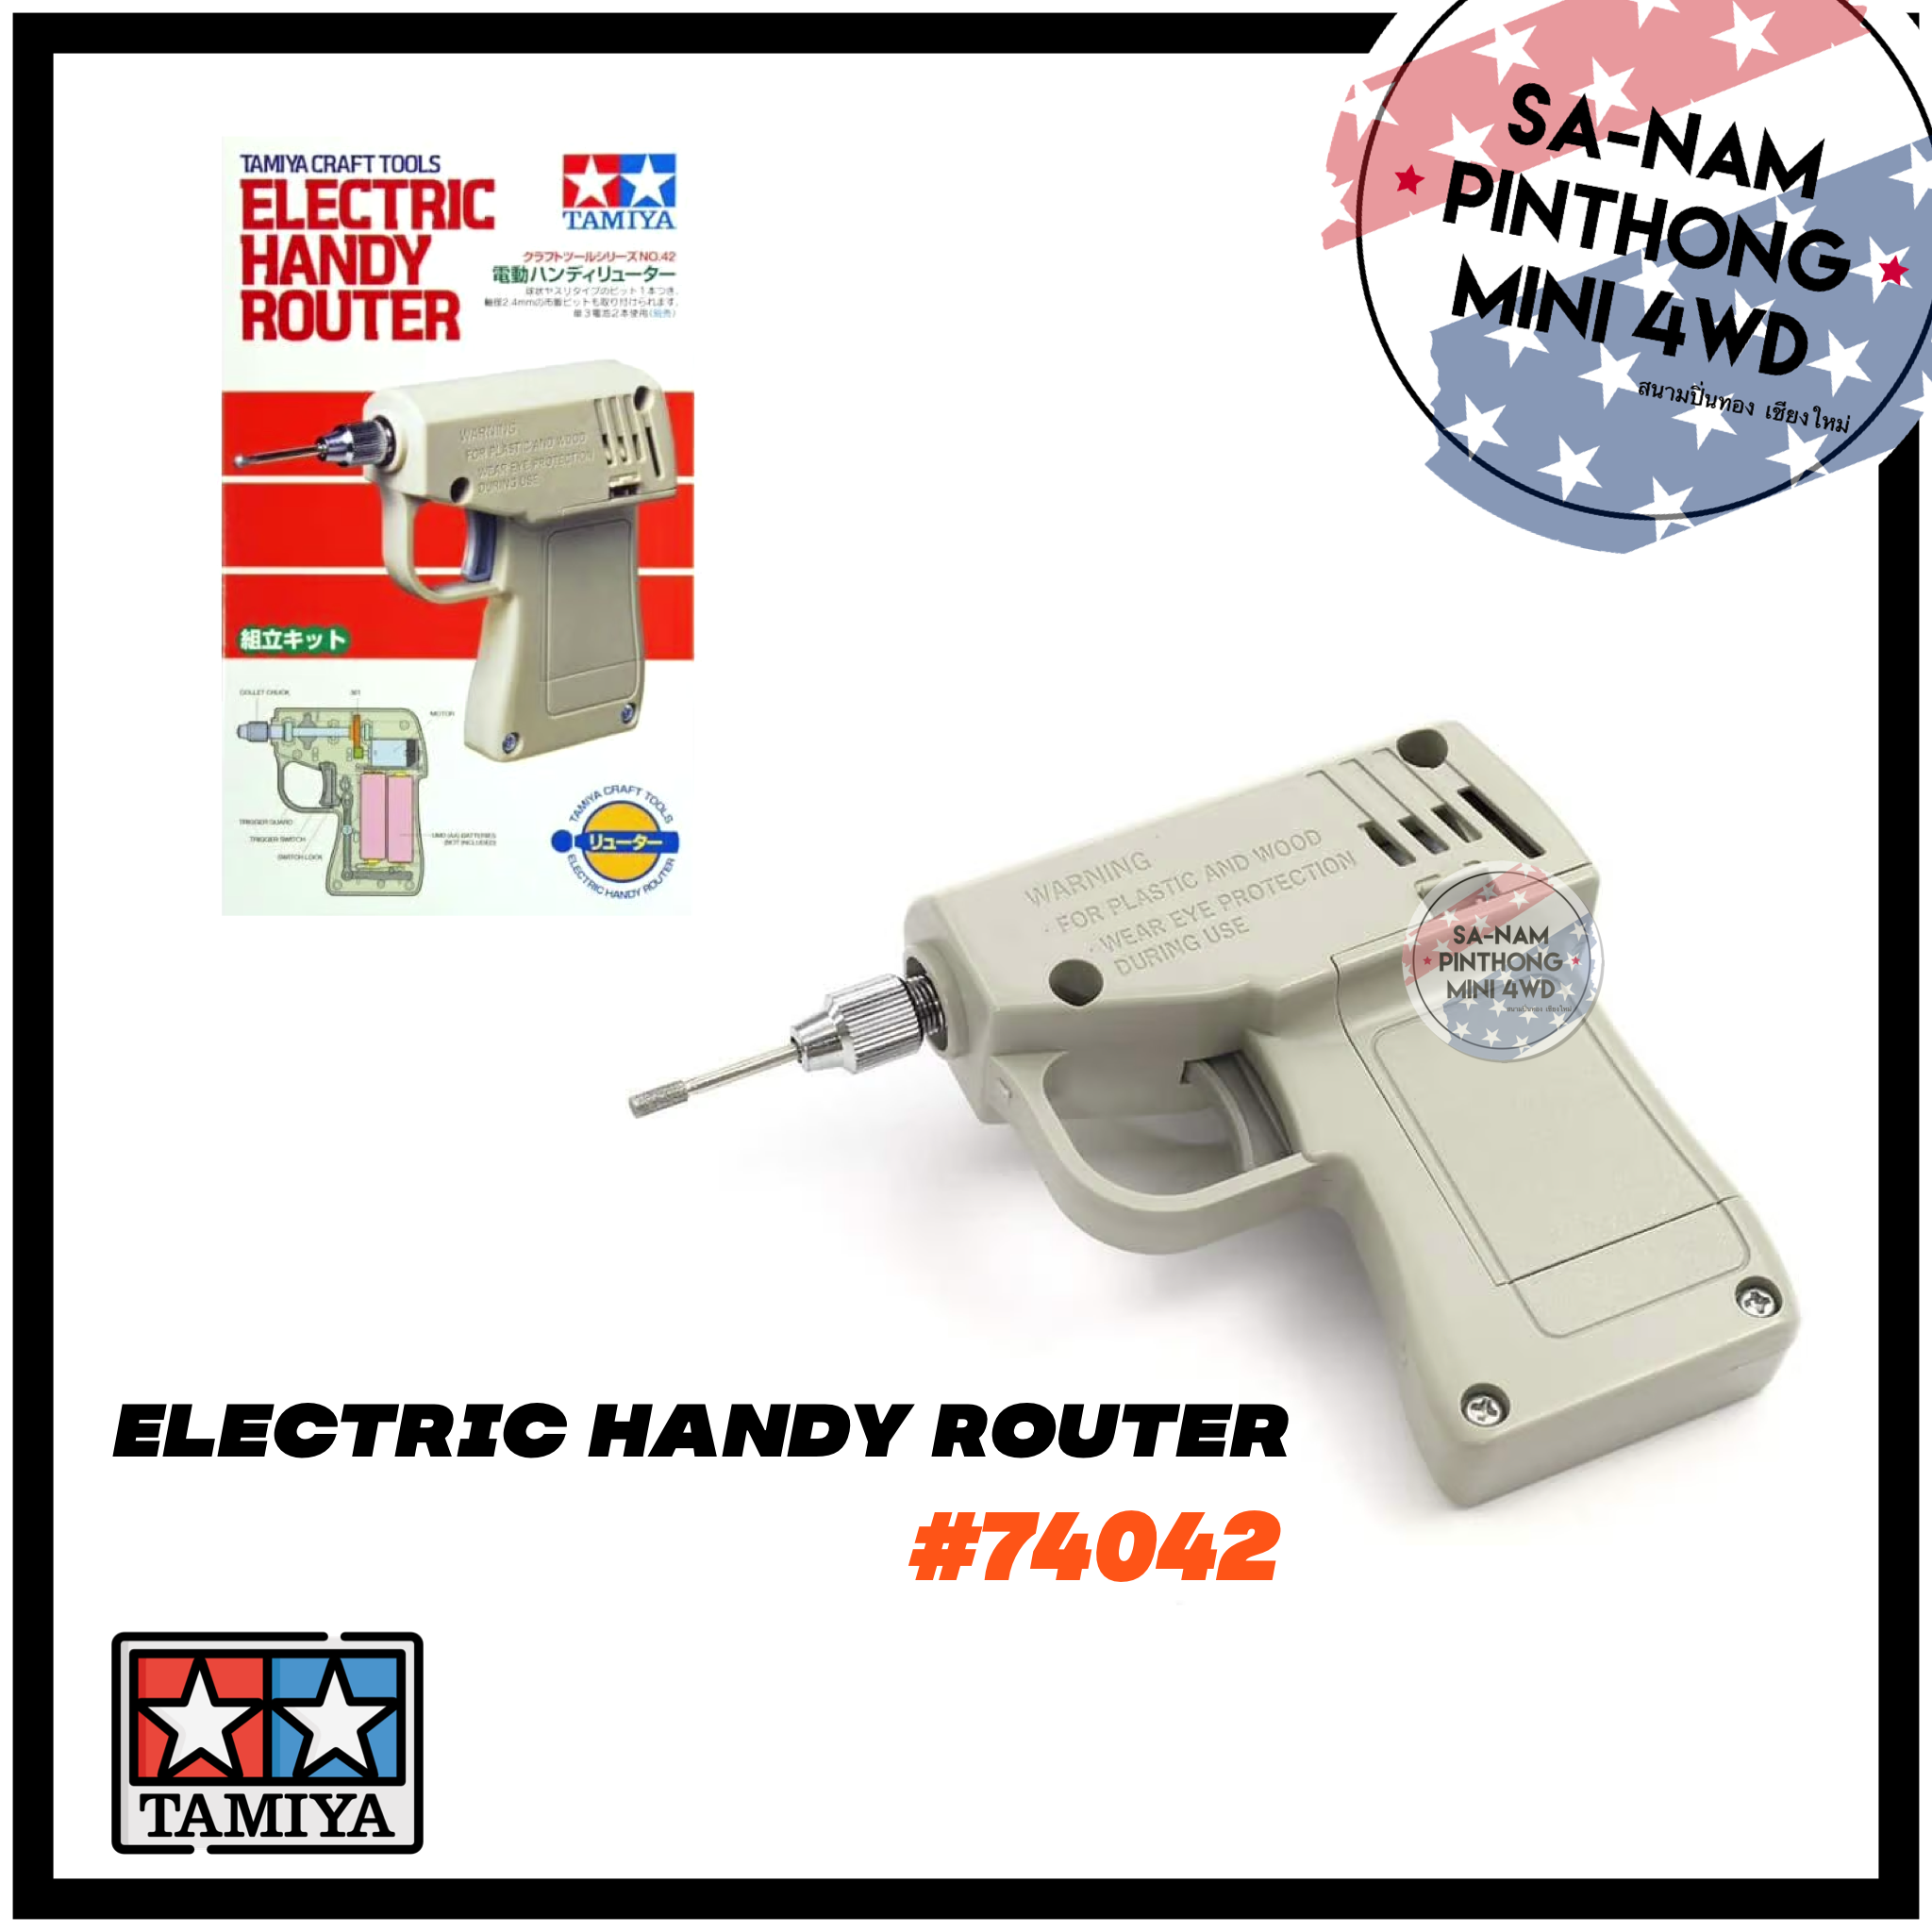 Electric Handy Router Tamiya 74042